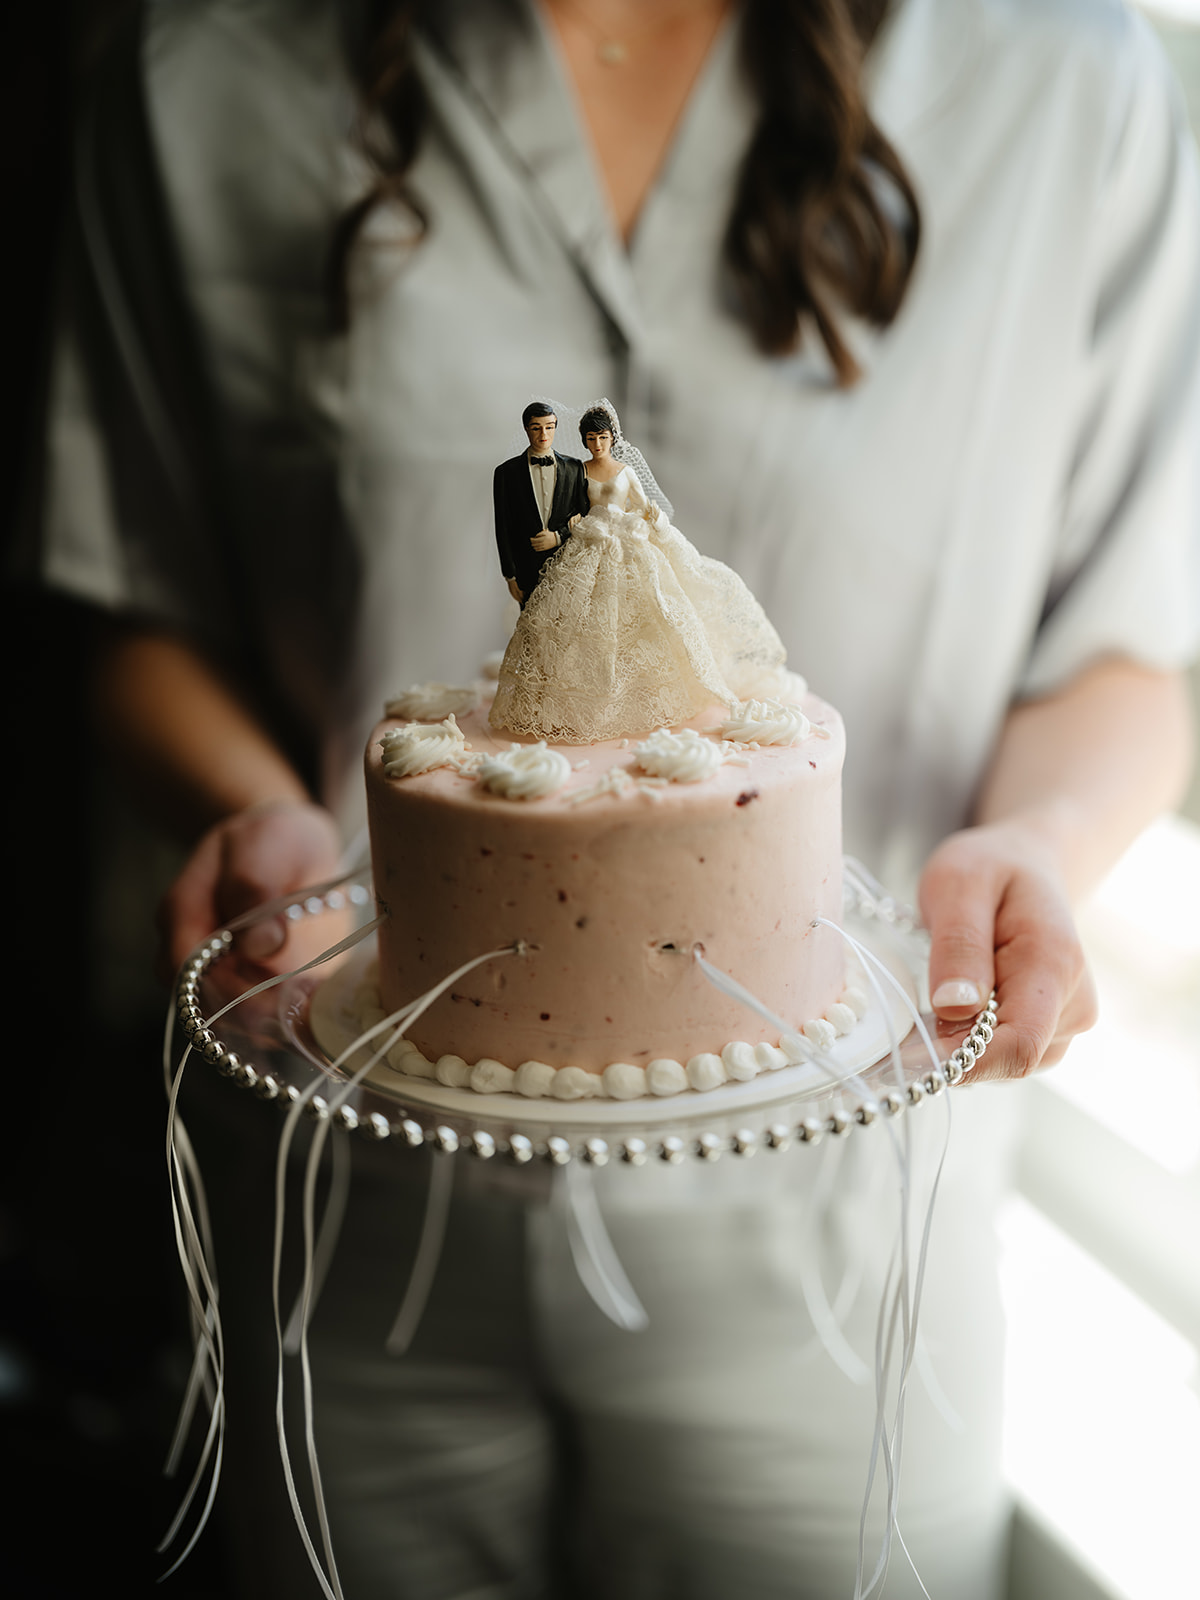 New Orleans Wedding Cake Tradition